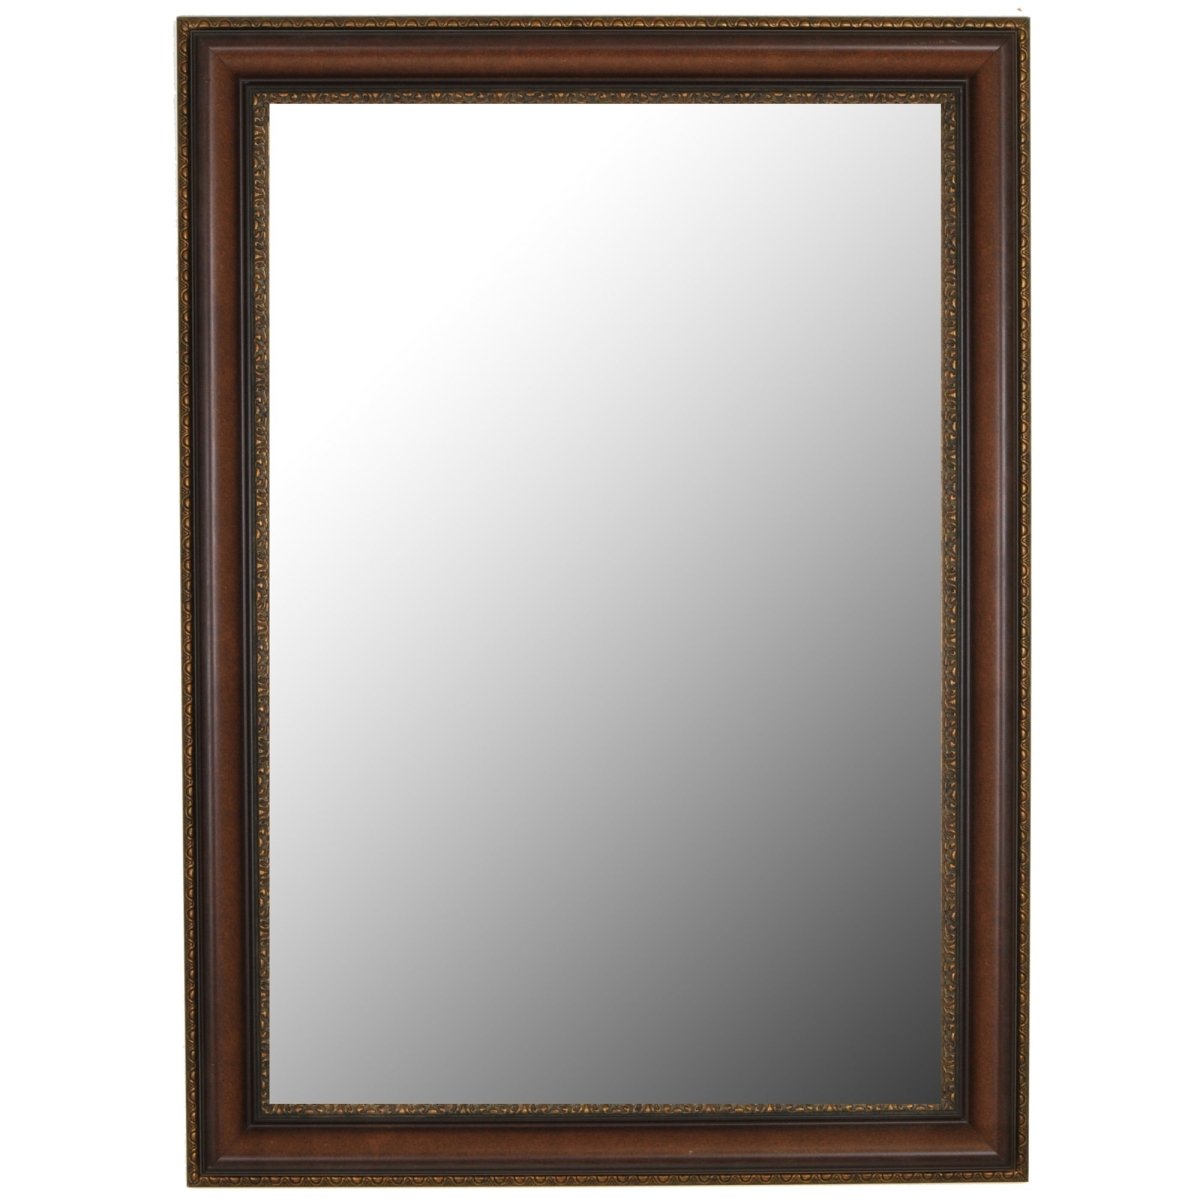 Hitchcock Butterfield 8105000 Brown Janette Wall Mirror - 17.5 X 35.5 In.